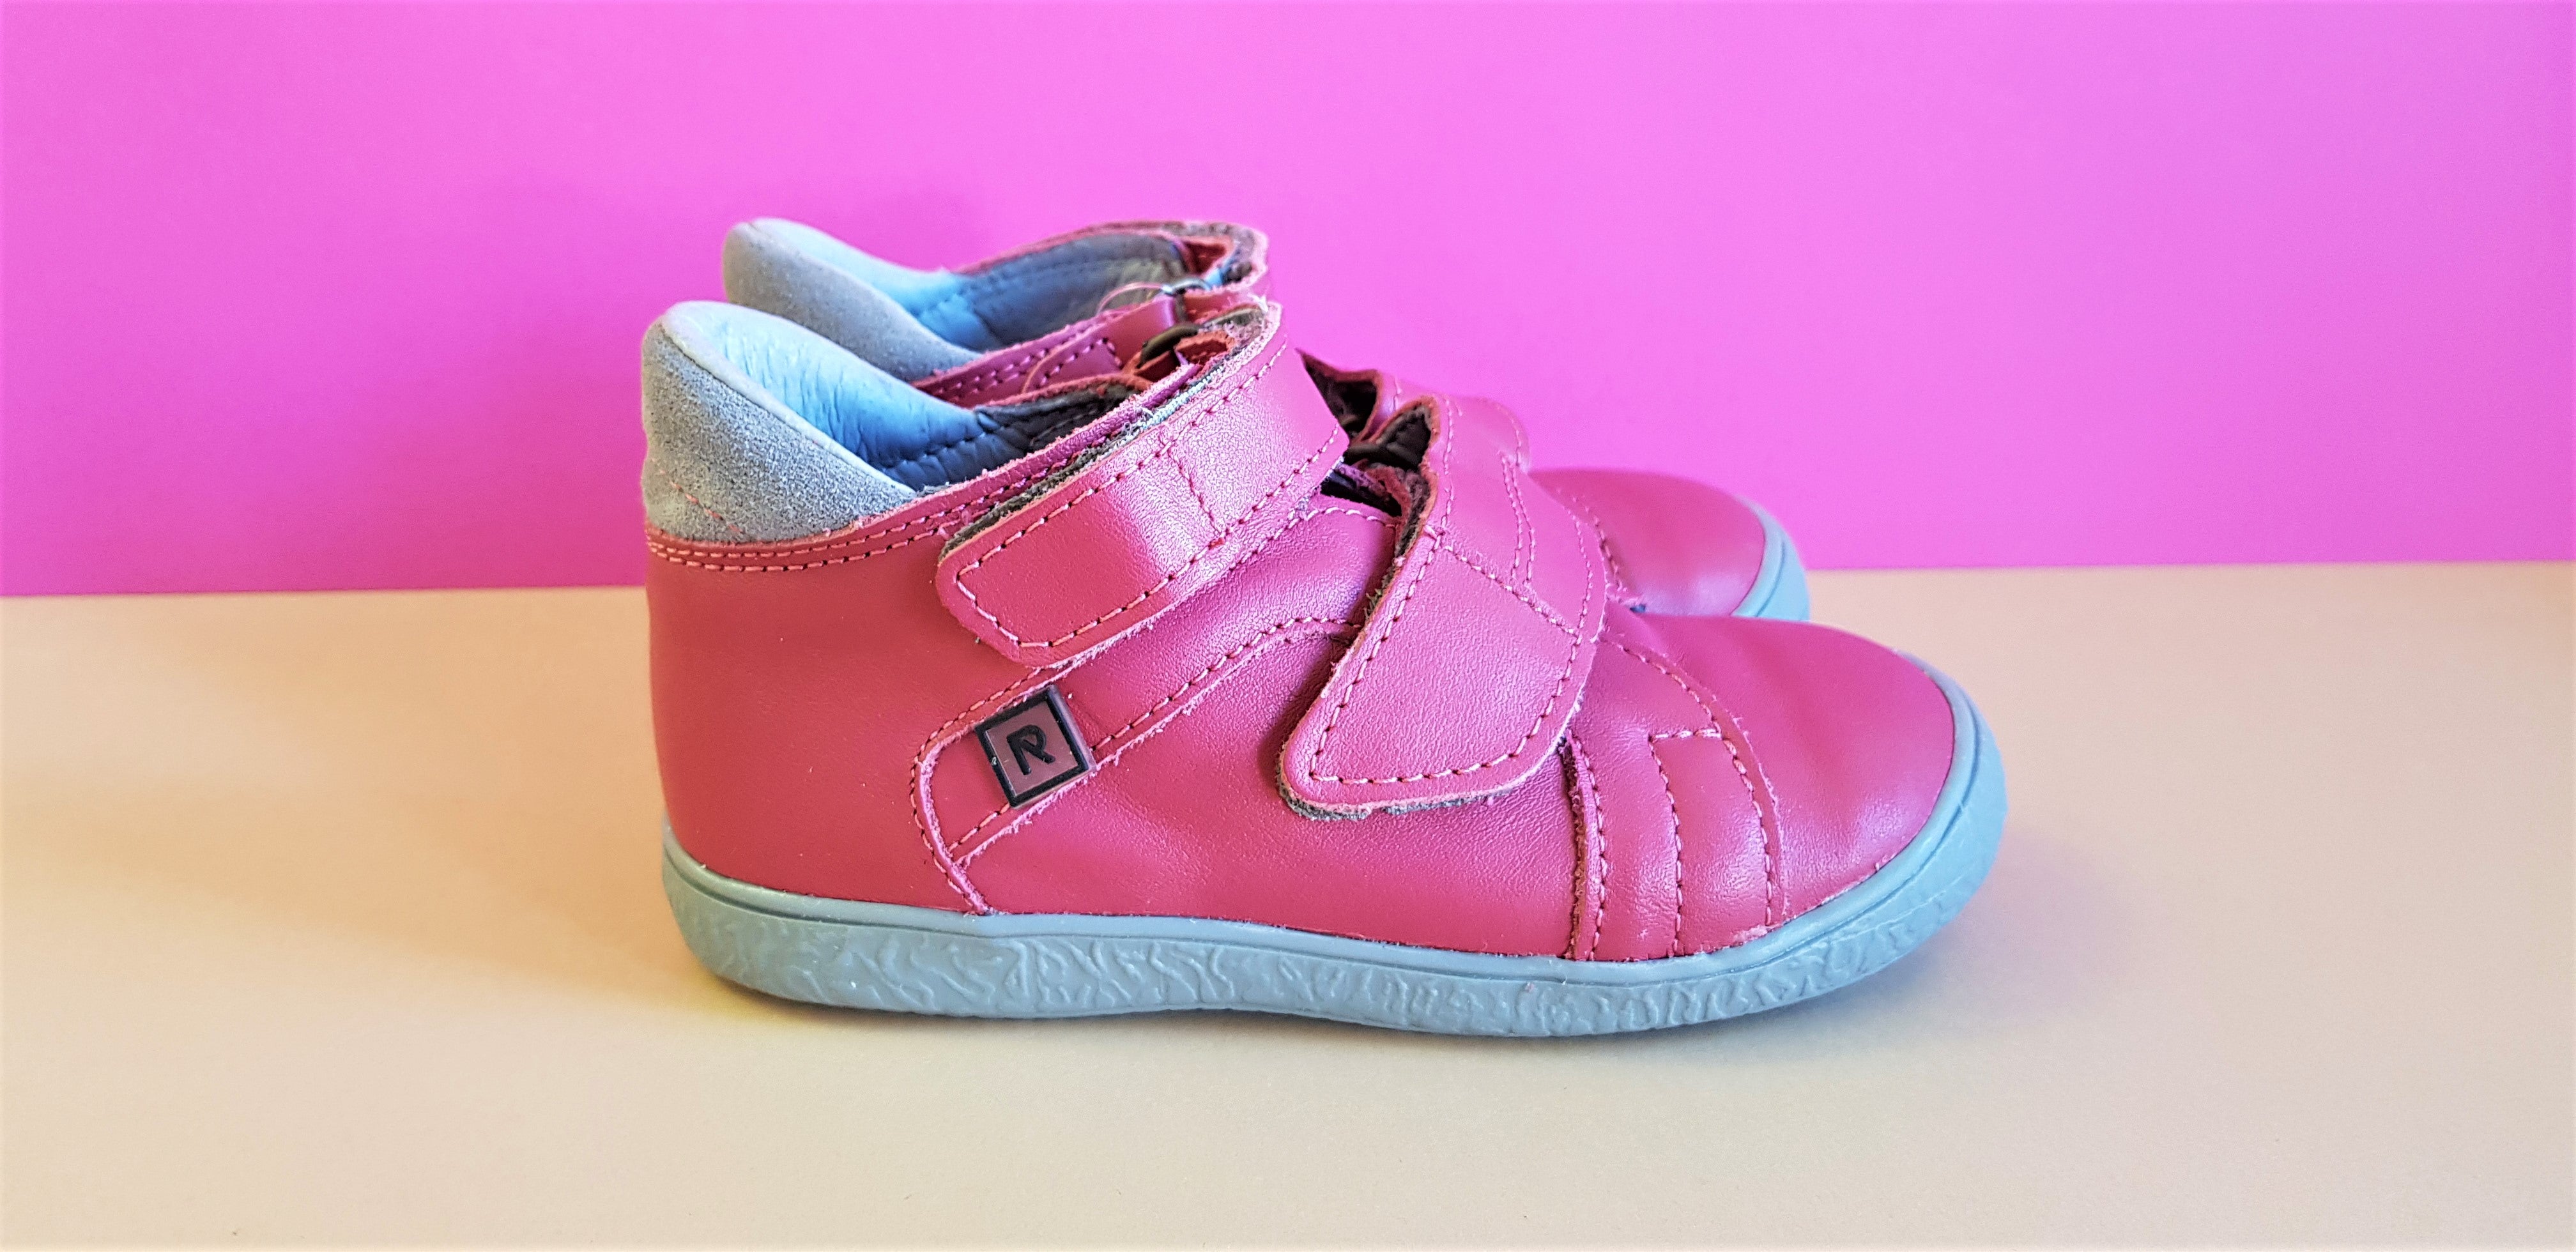 Pink Handmade High-quality Rak Children's Shoes with grey sole, hook-and-loop fasteners and round toe box